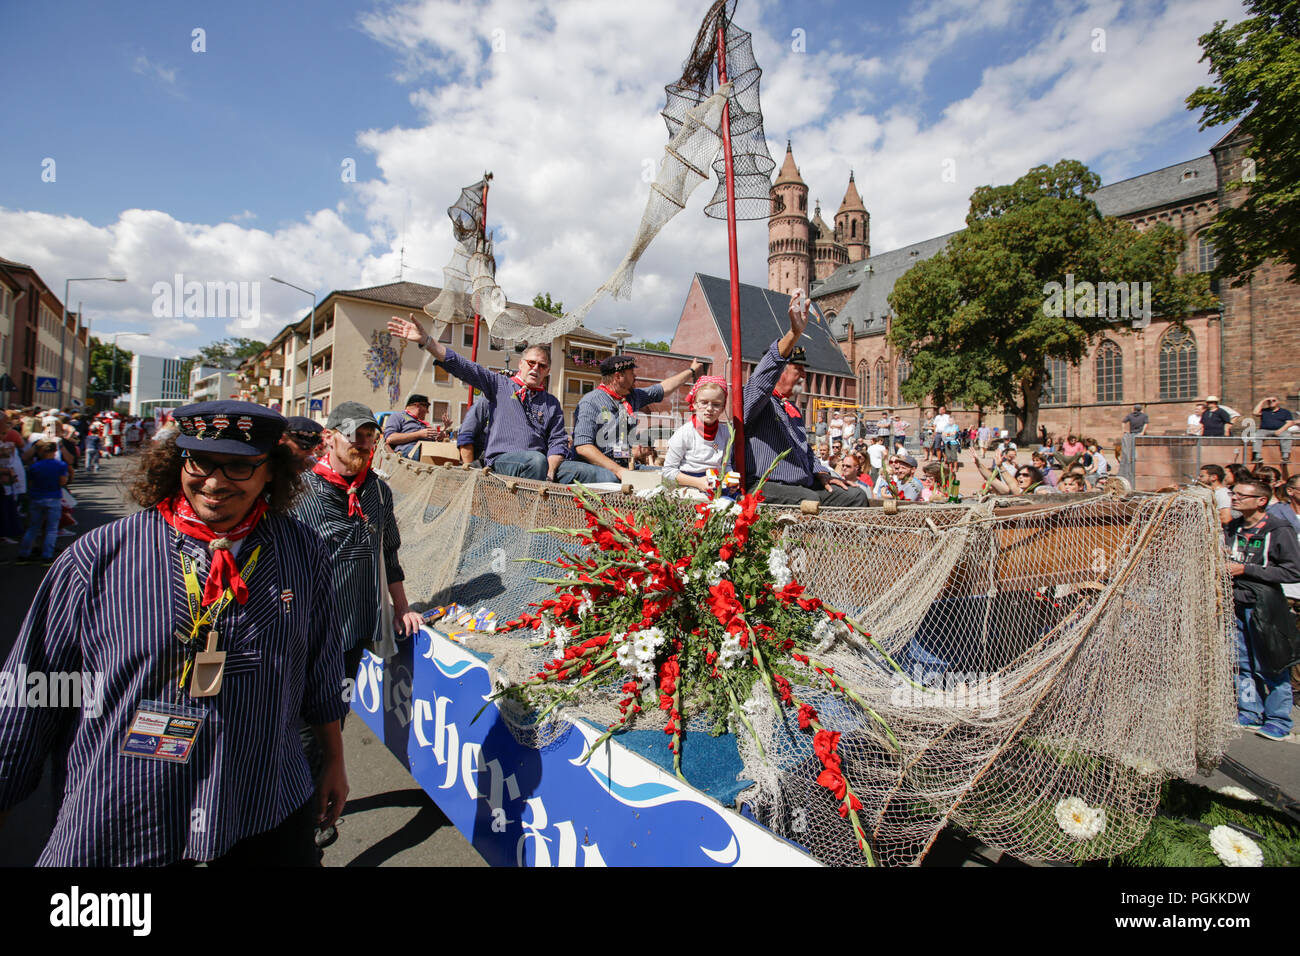 Worms, Germany. 26th Aug, 2018. Members of the old fishermen's guild of Worms ride in a fishing boat in the parade. The first highlight of the 2018 Backfischfest was the big parade through the city of Worms with over 70 groups and floats. Community groups, music groups and businesses from Worms and further afield took part. Credit: Michael Debets/Pacific Press/Alamy Live News Stock Photo